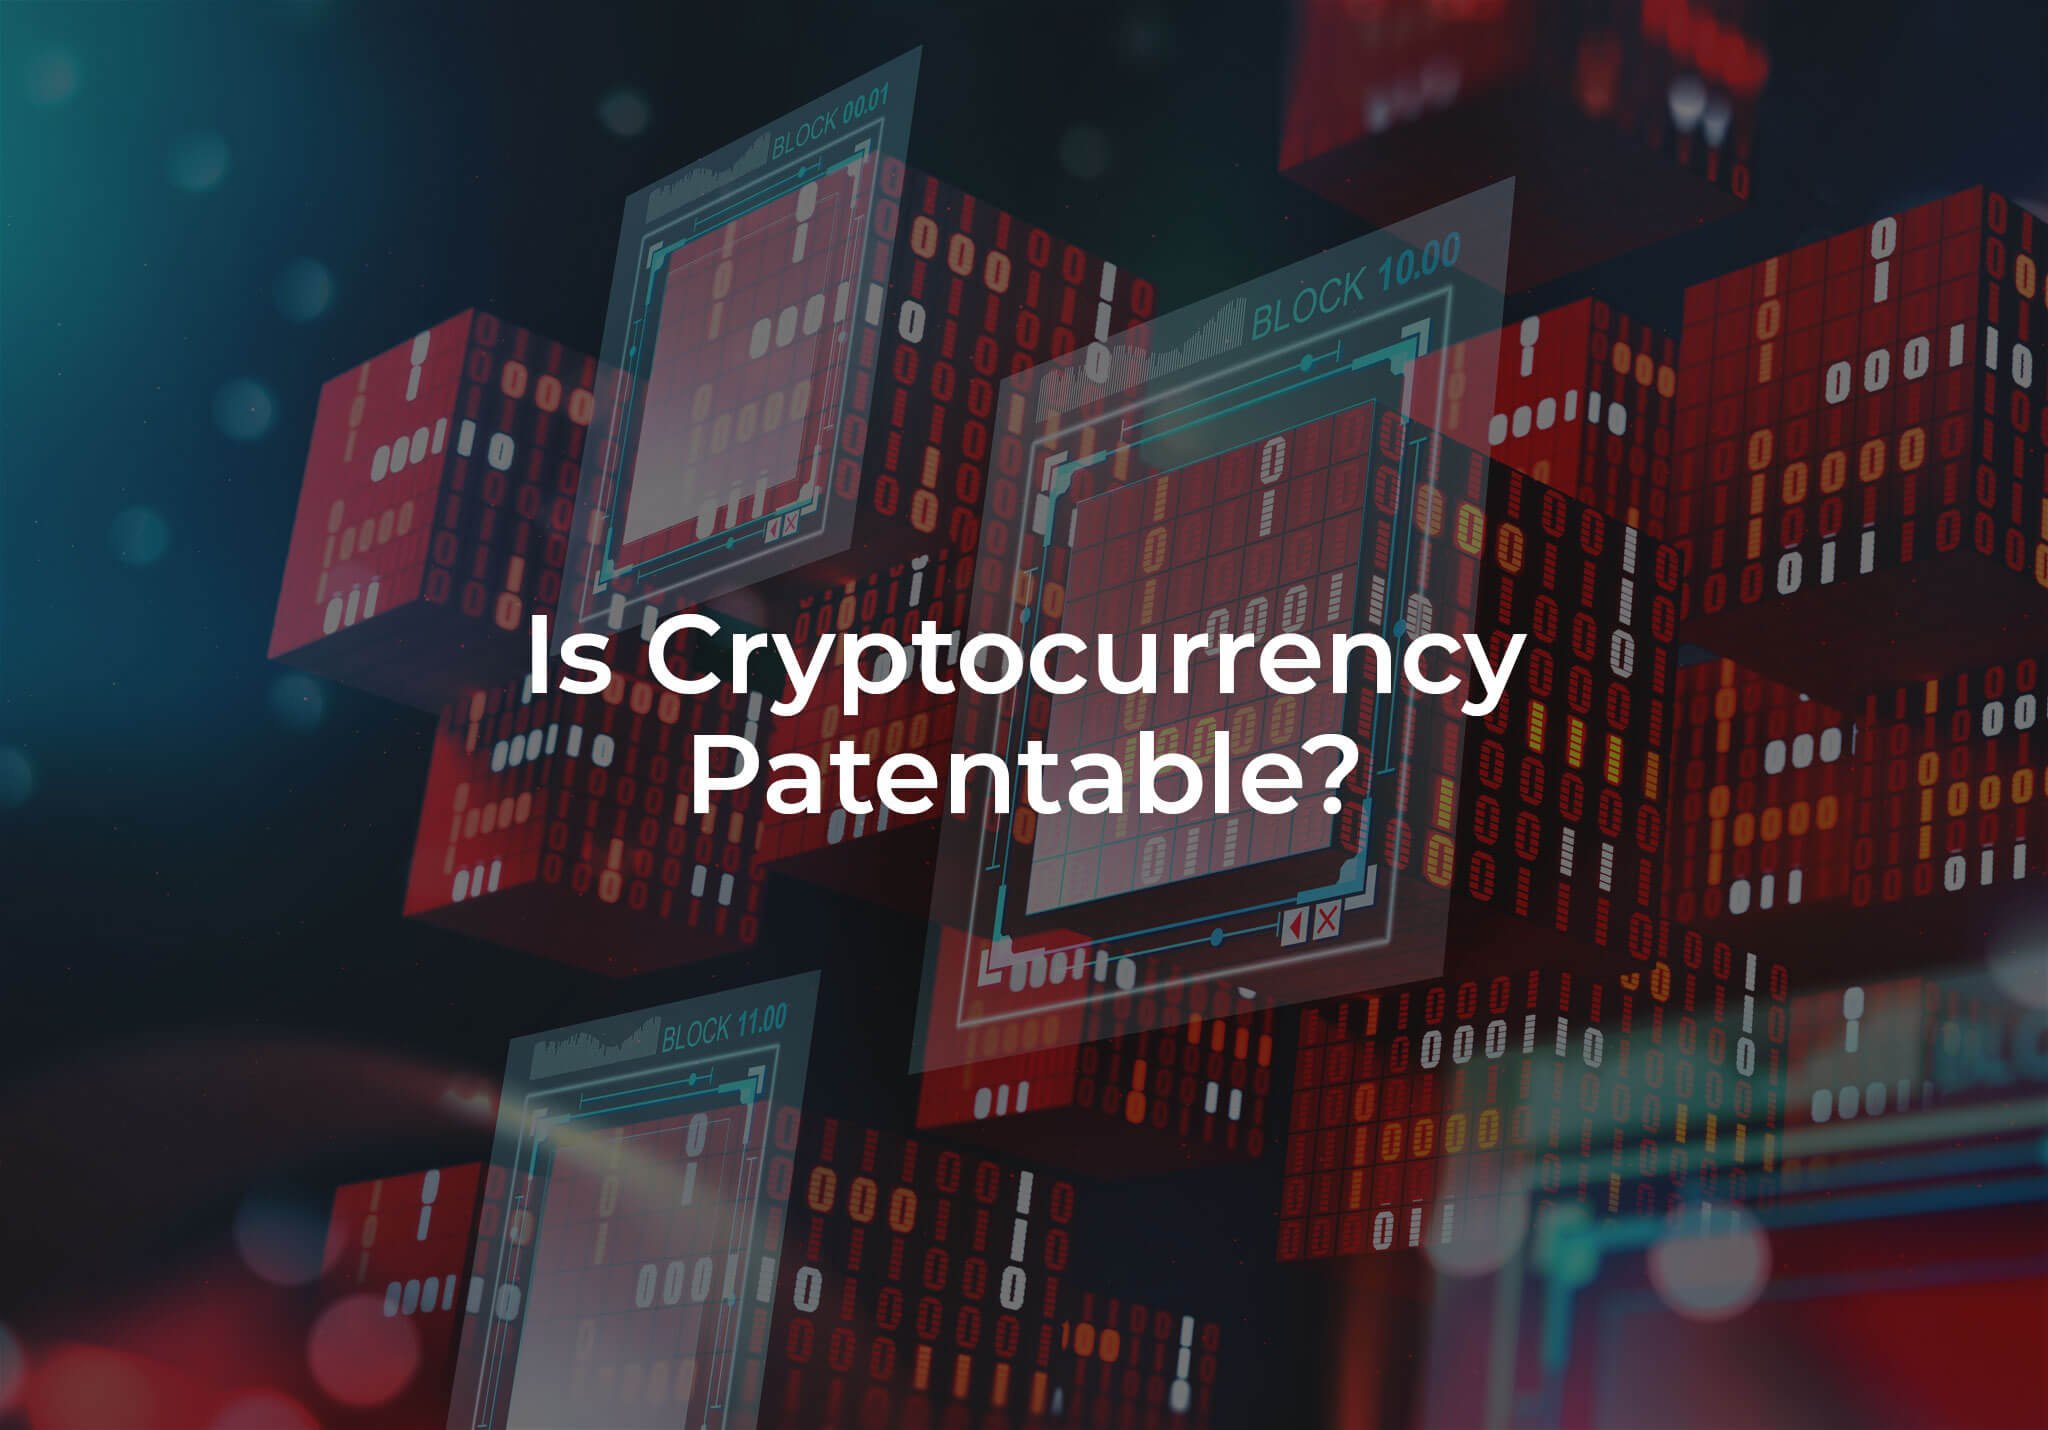 Is Cryptocurrency Patentable?